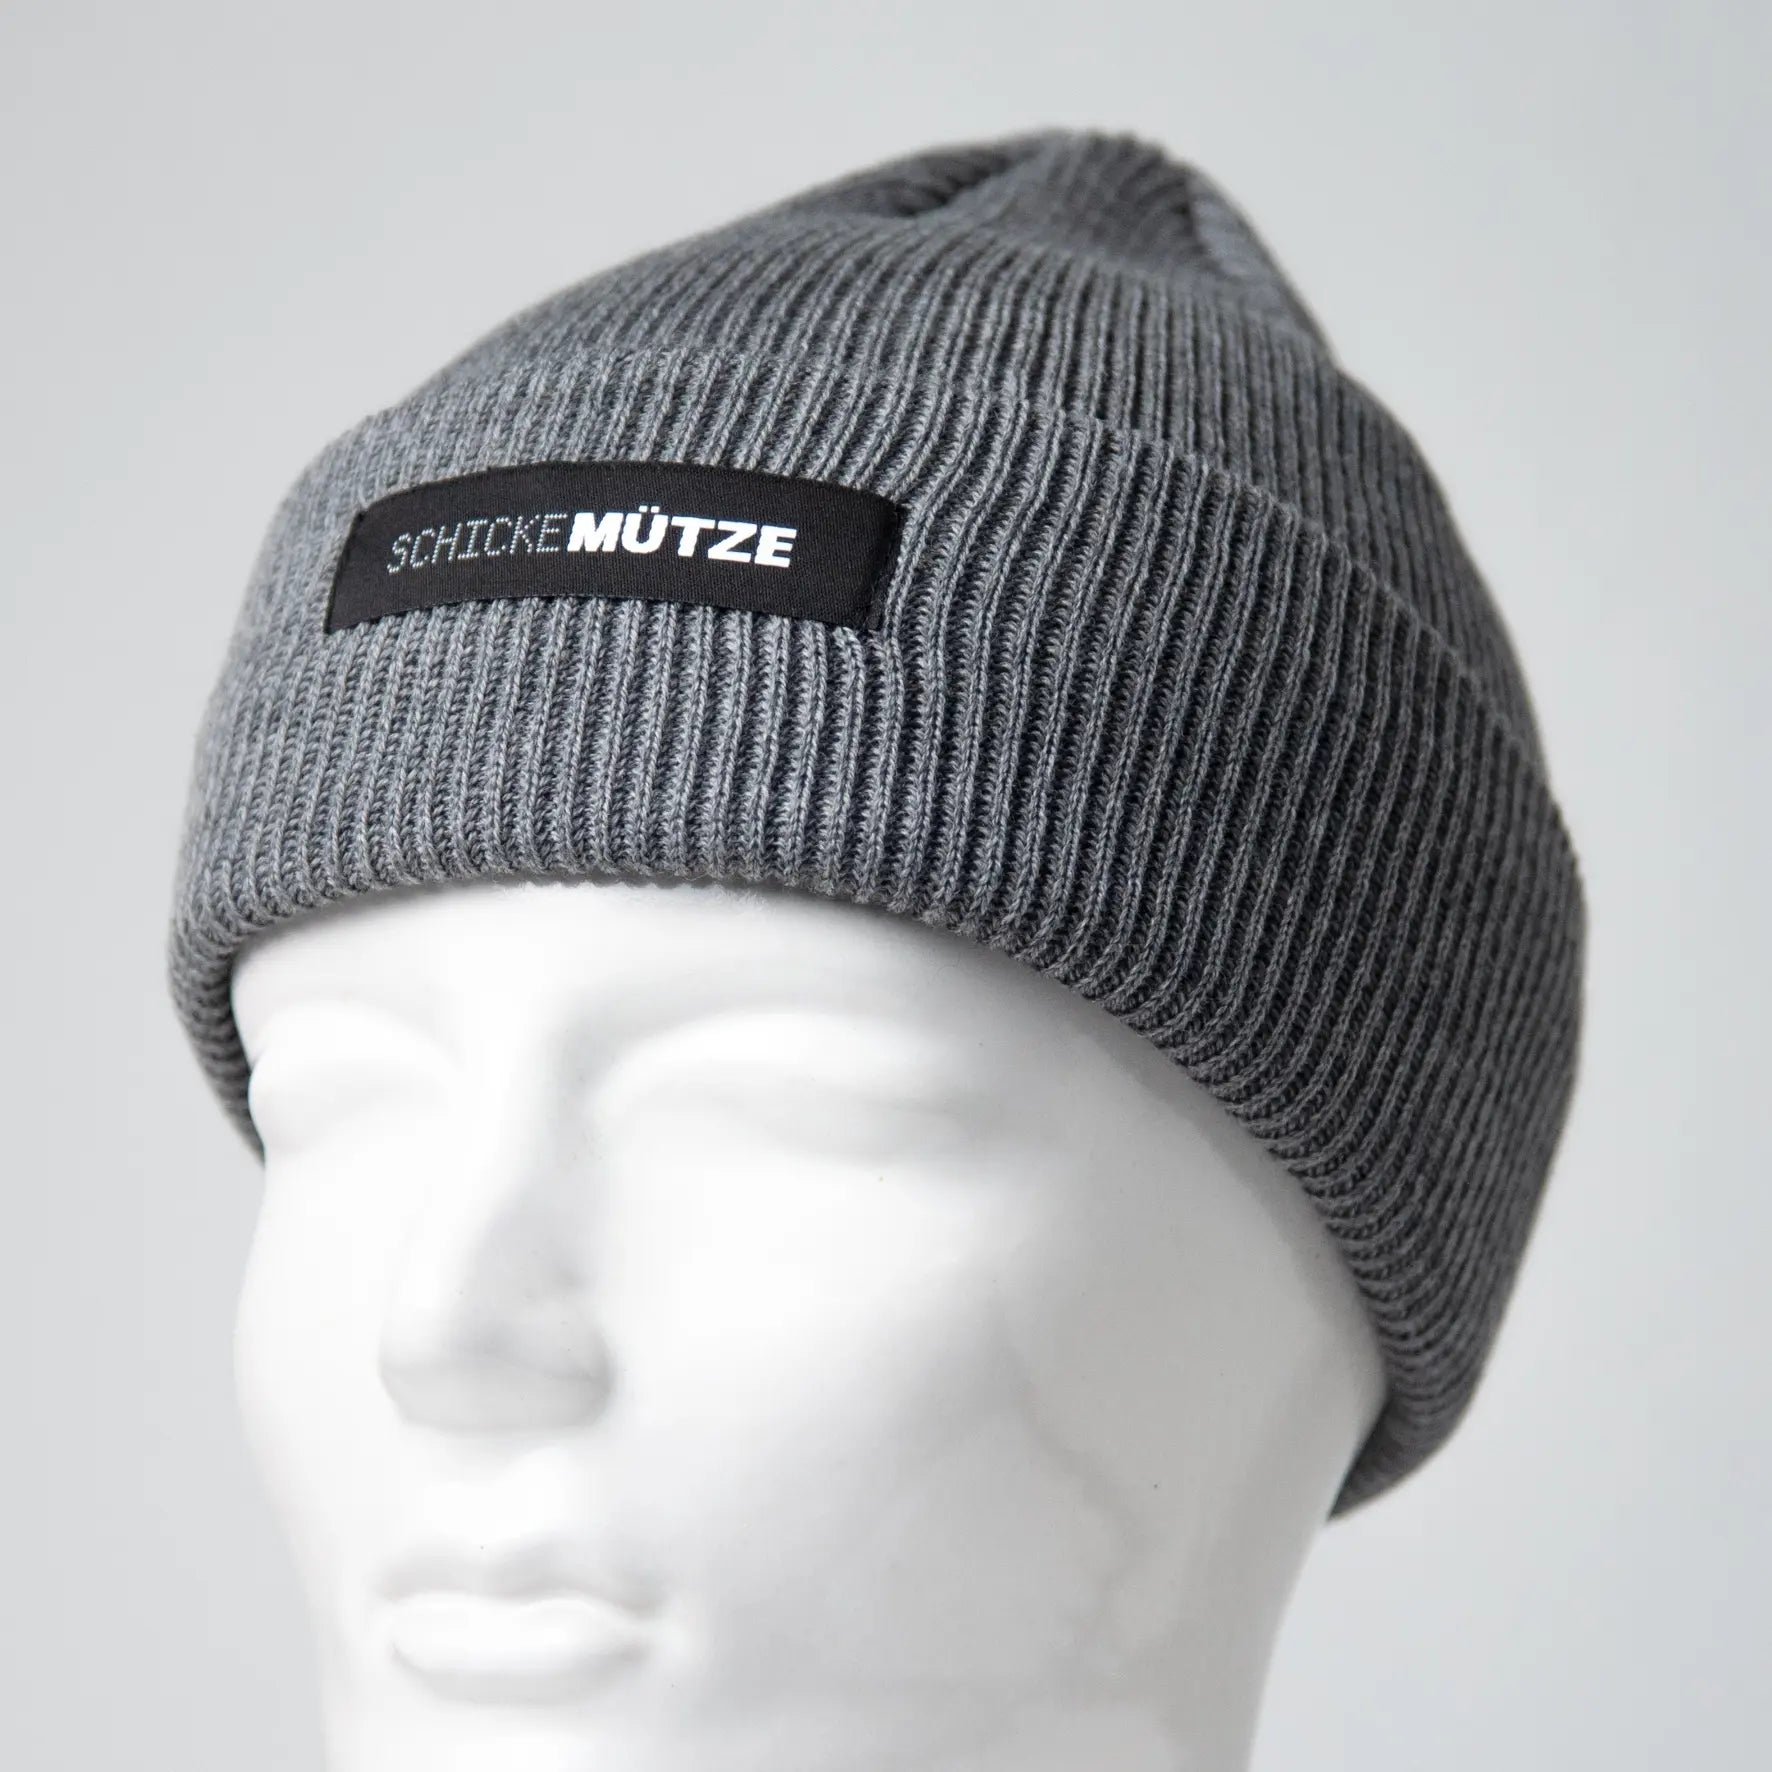 Chic knitted hat with fine knit ribbing